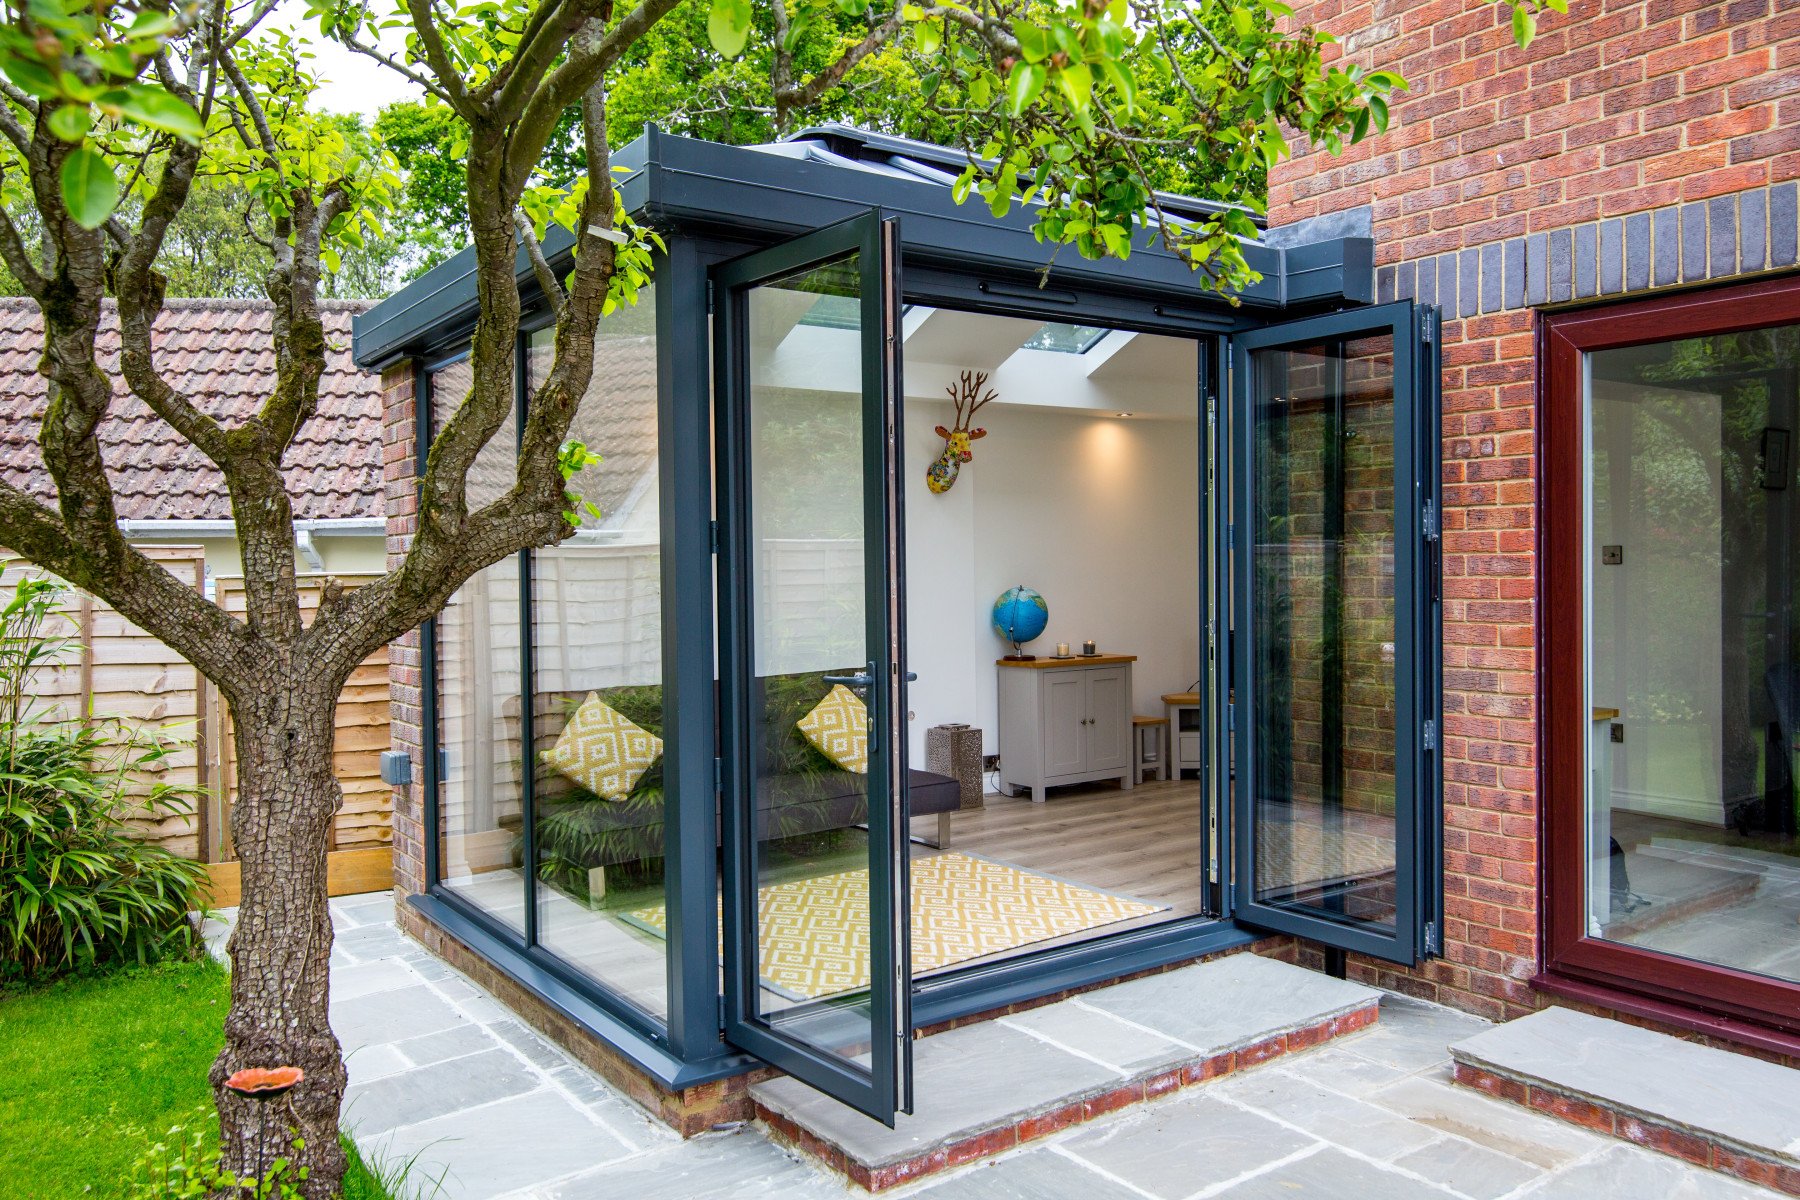 Conservatory bifold doors to open up space